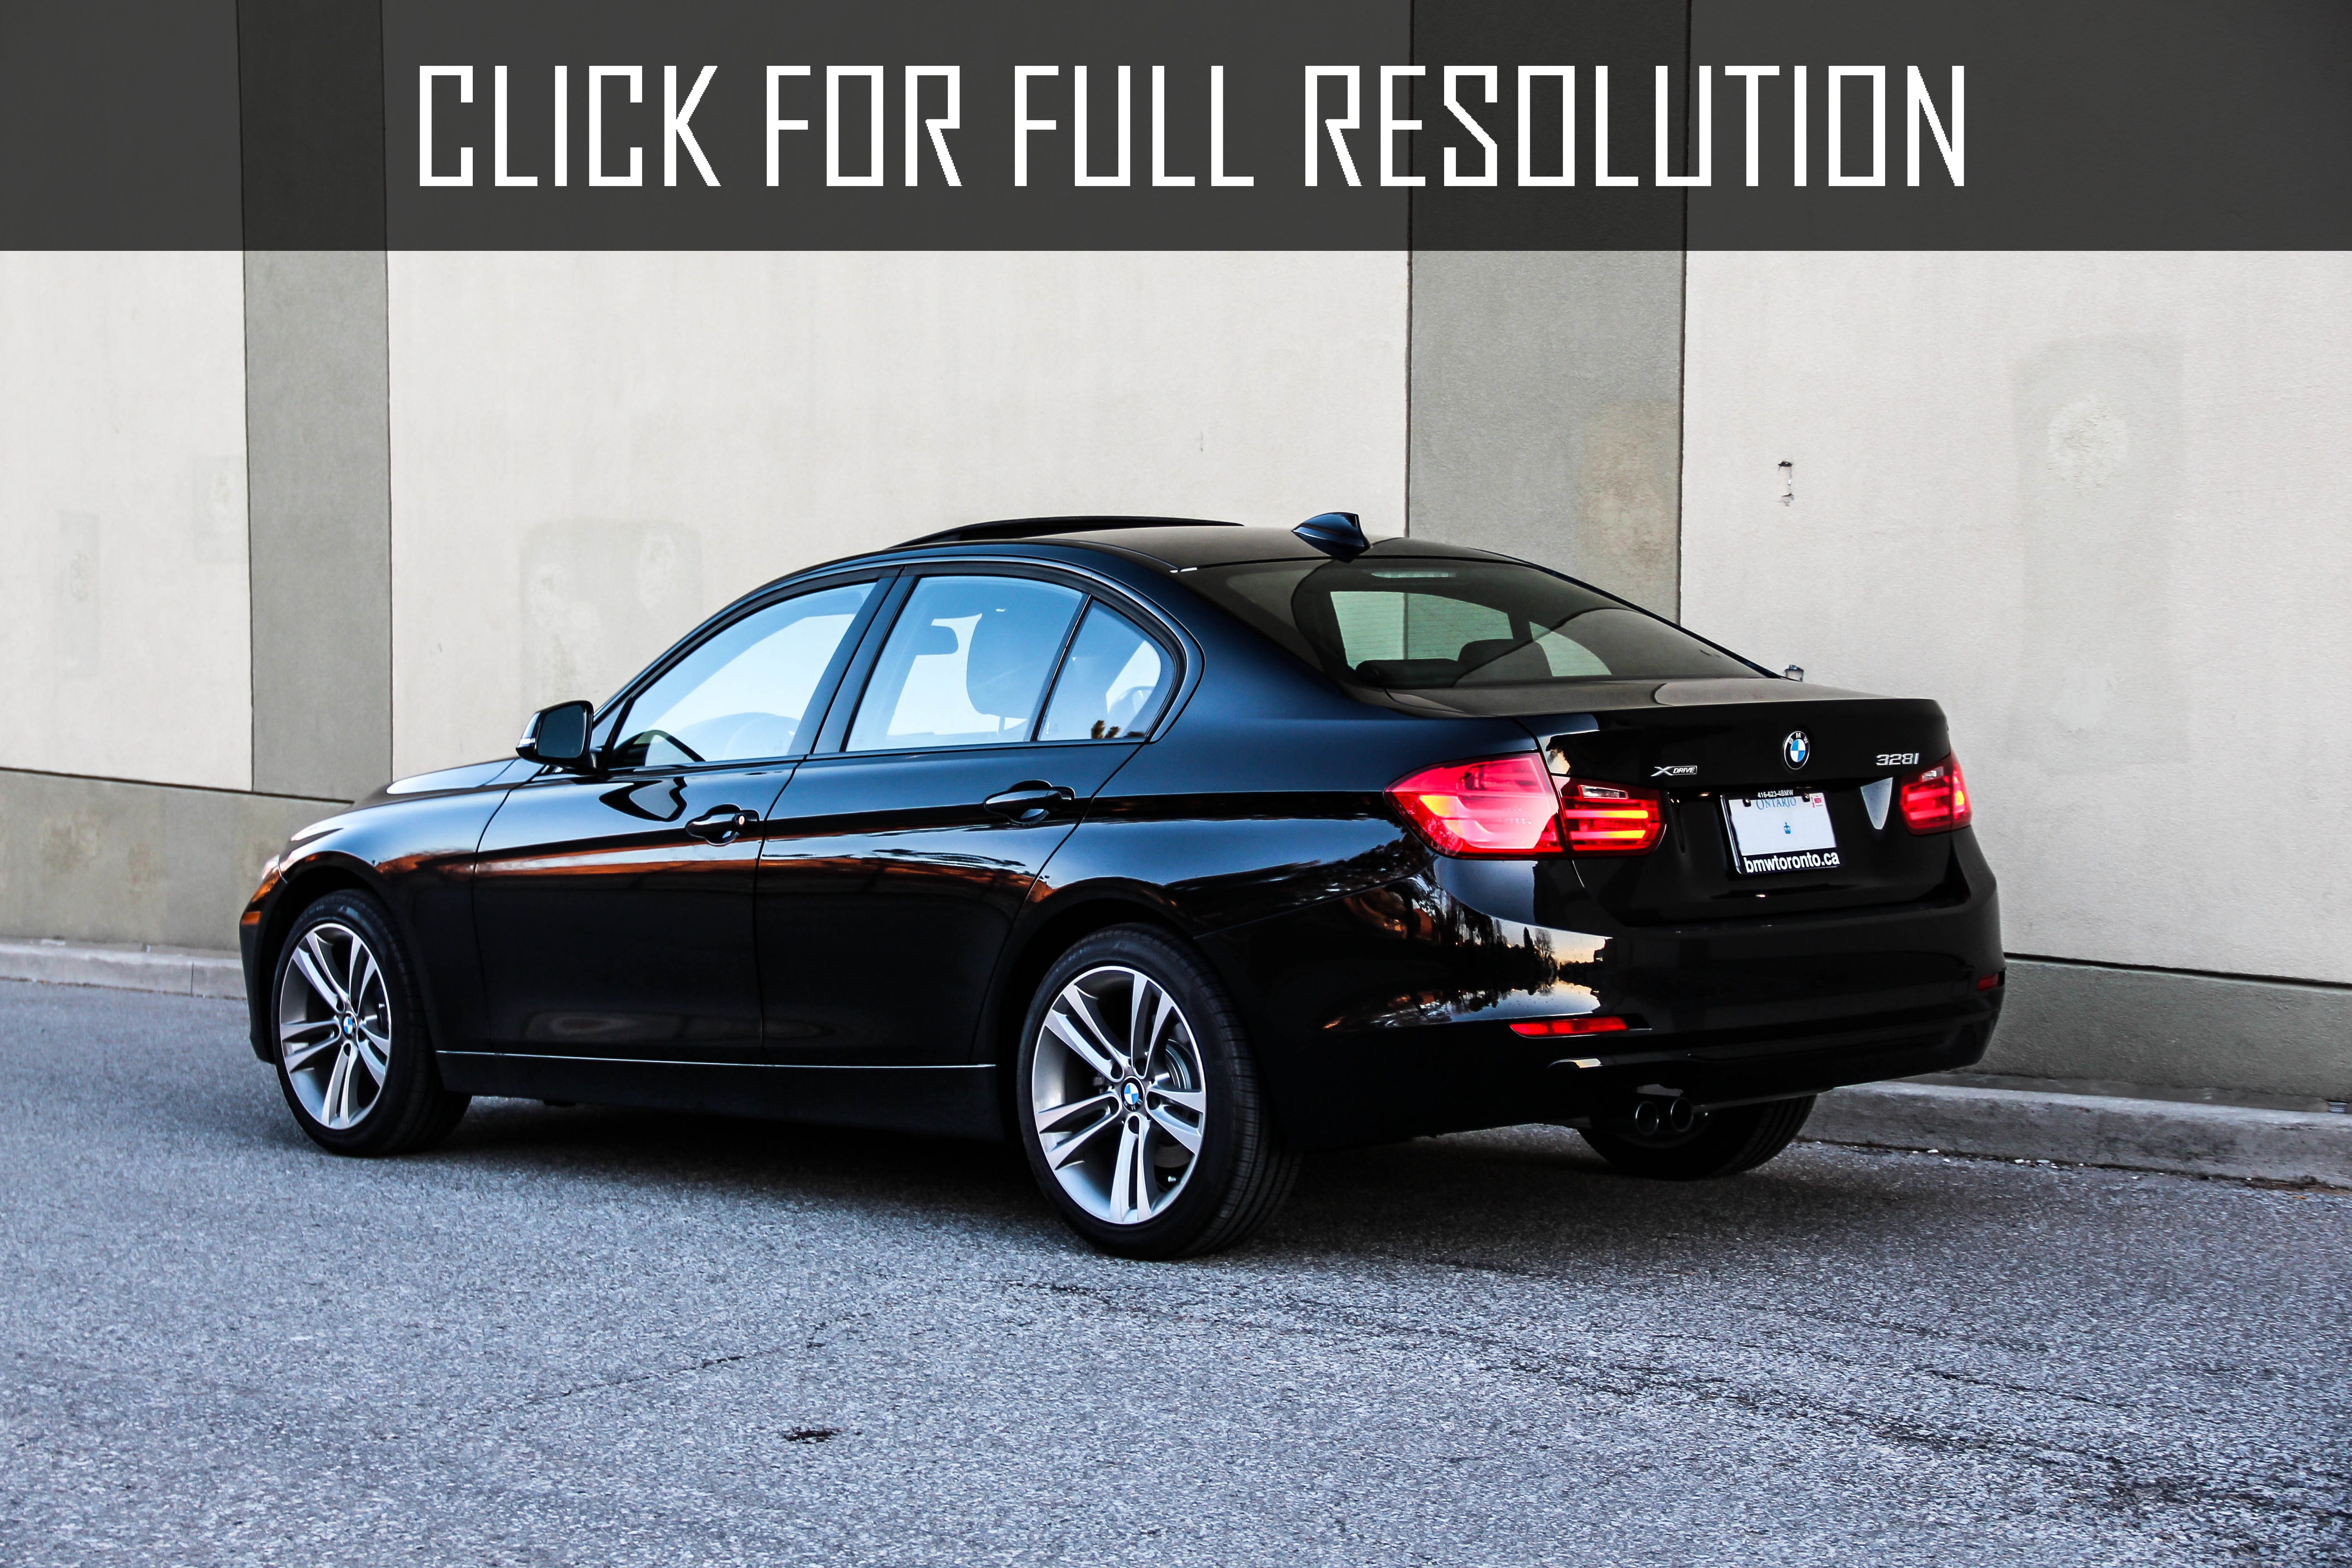 2014 Bmw 328i news, reviews, msrp, ratings with amazing